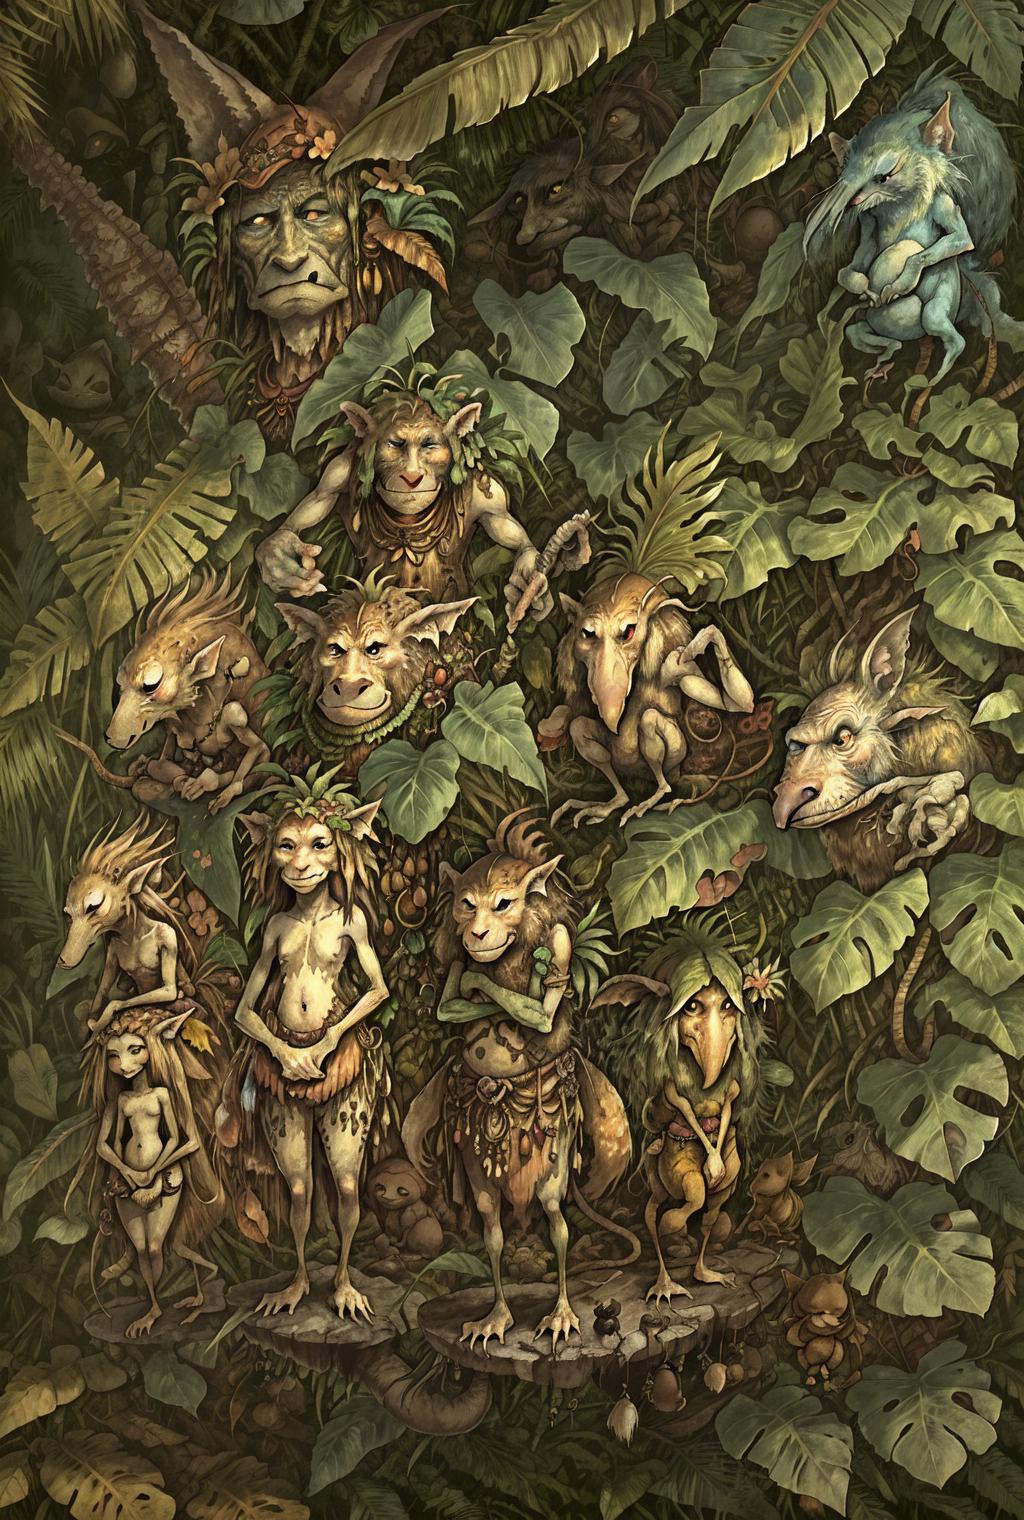 Faeries and forest creatures - Brian Froud style image by NostalgiaForever